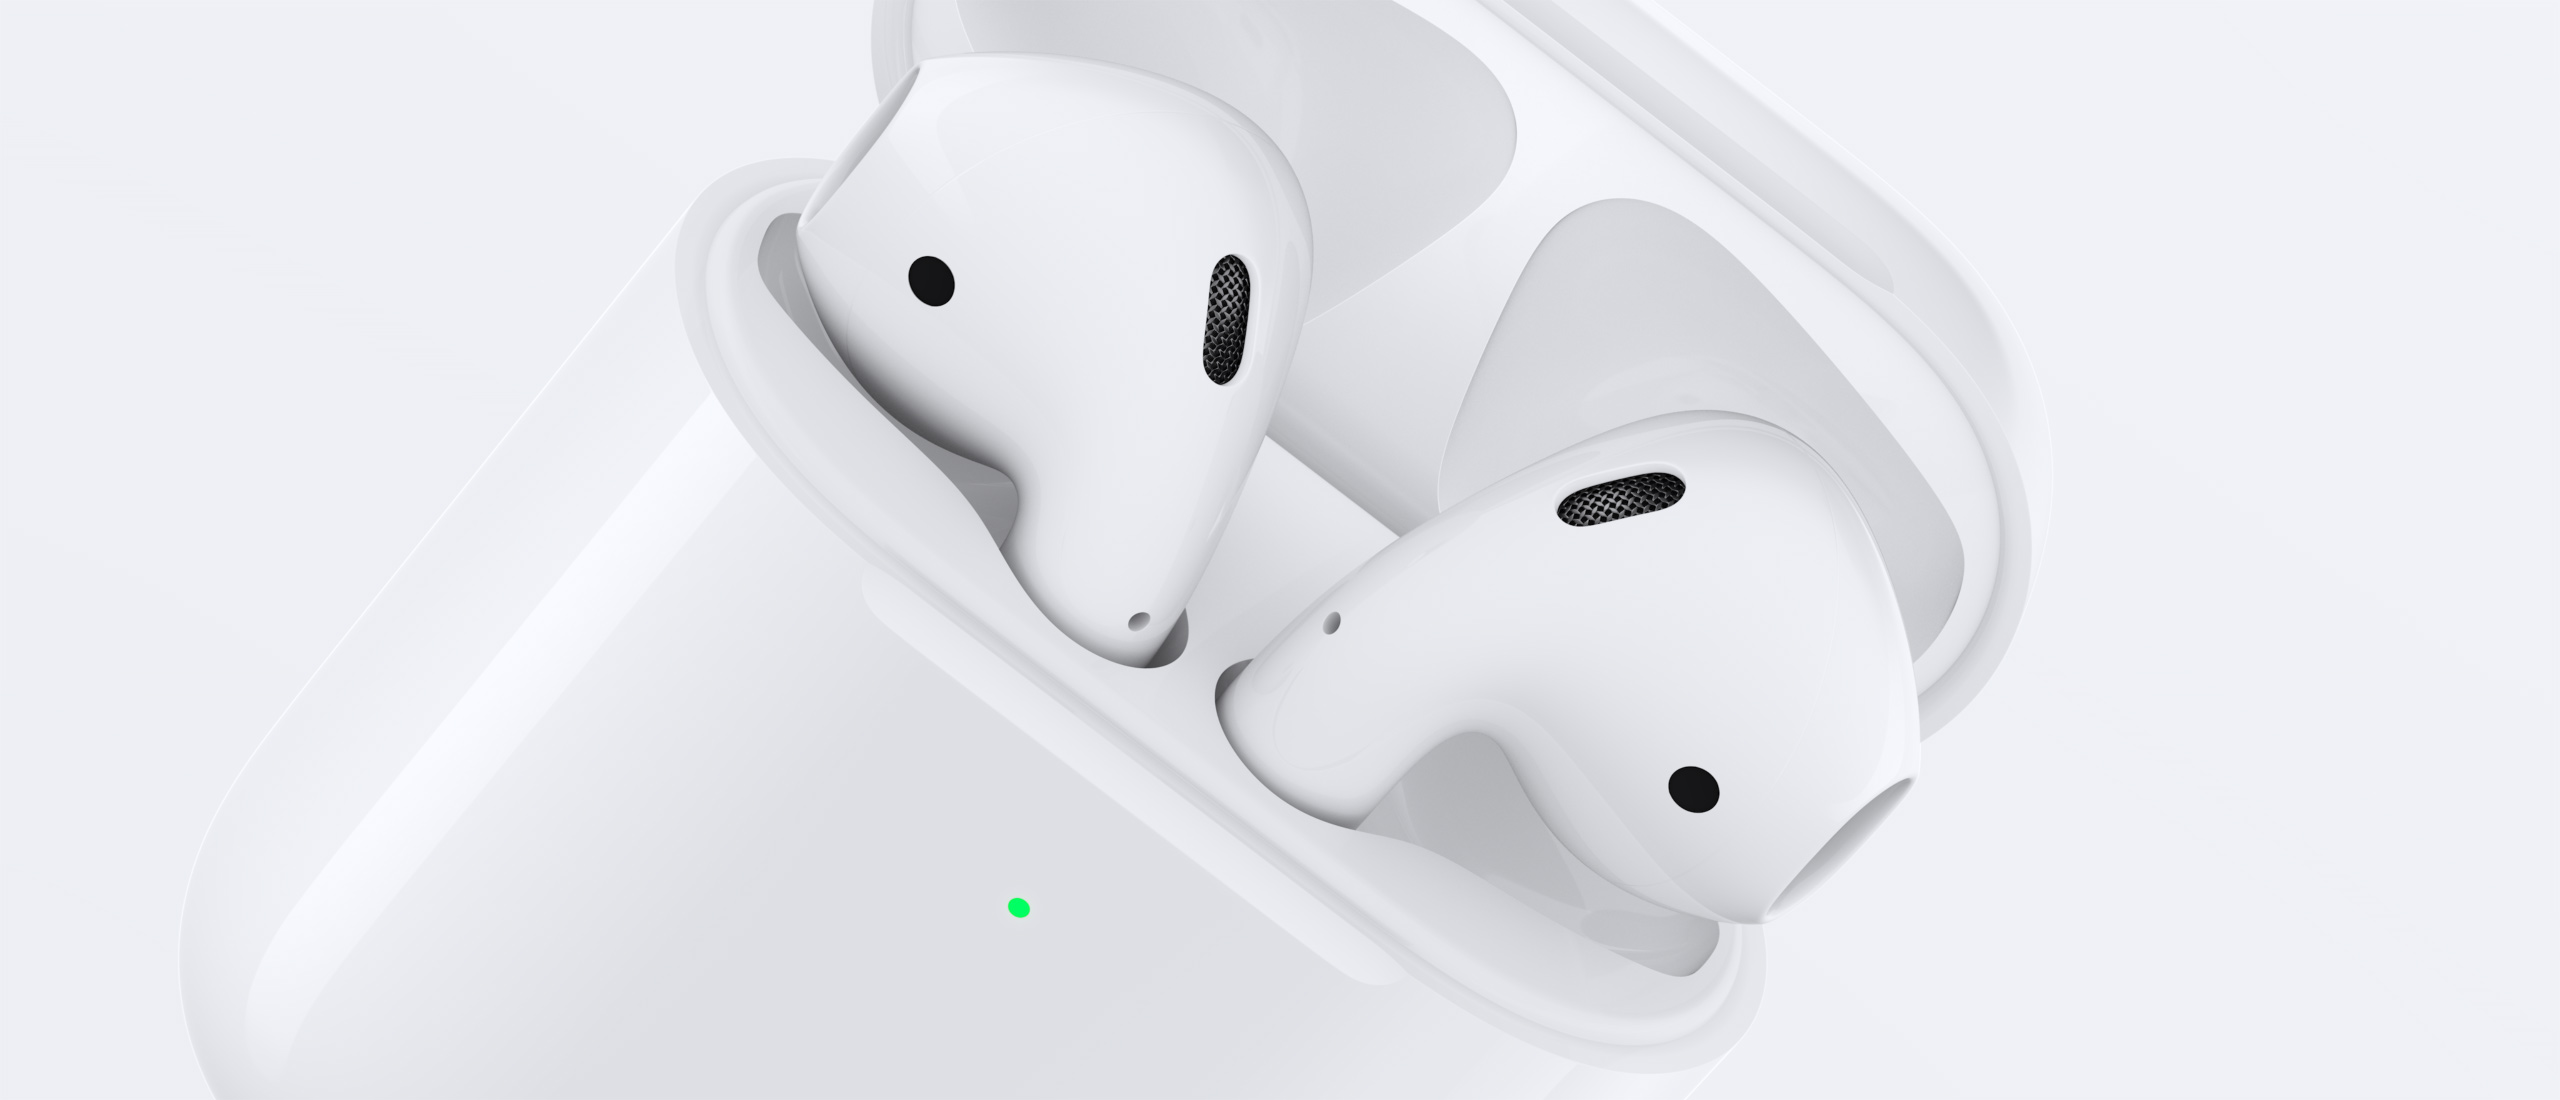 sending replacement AirPods unreleased firmware, making them unusable